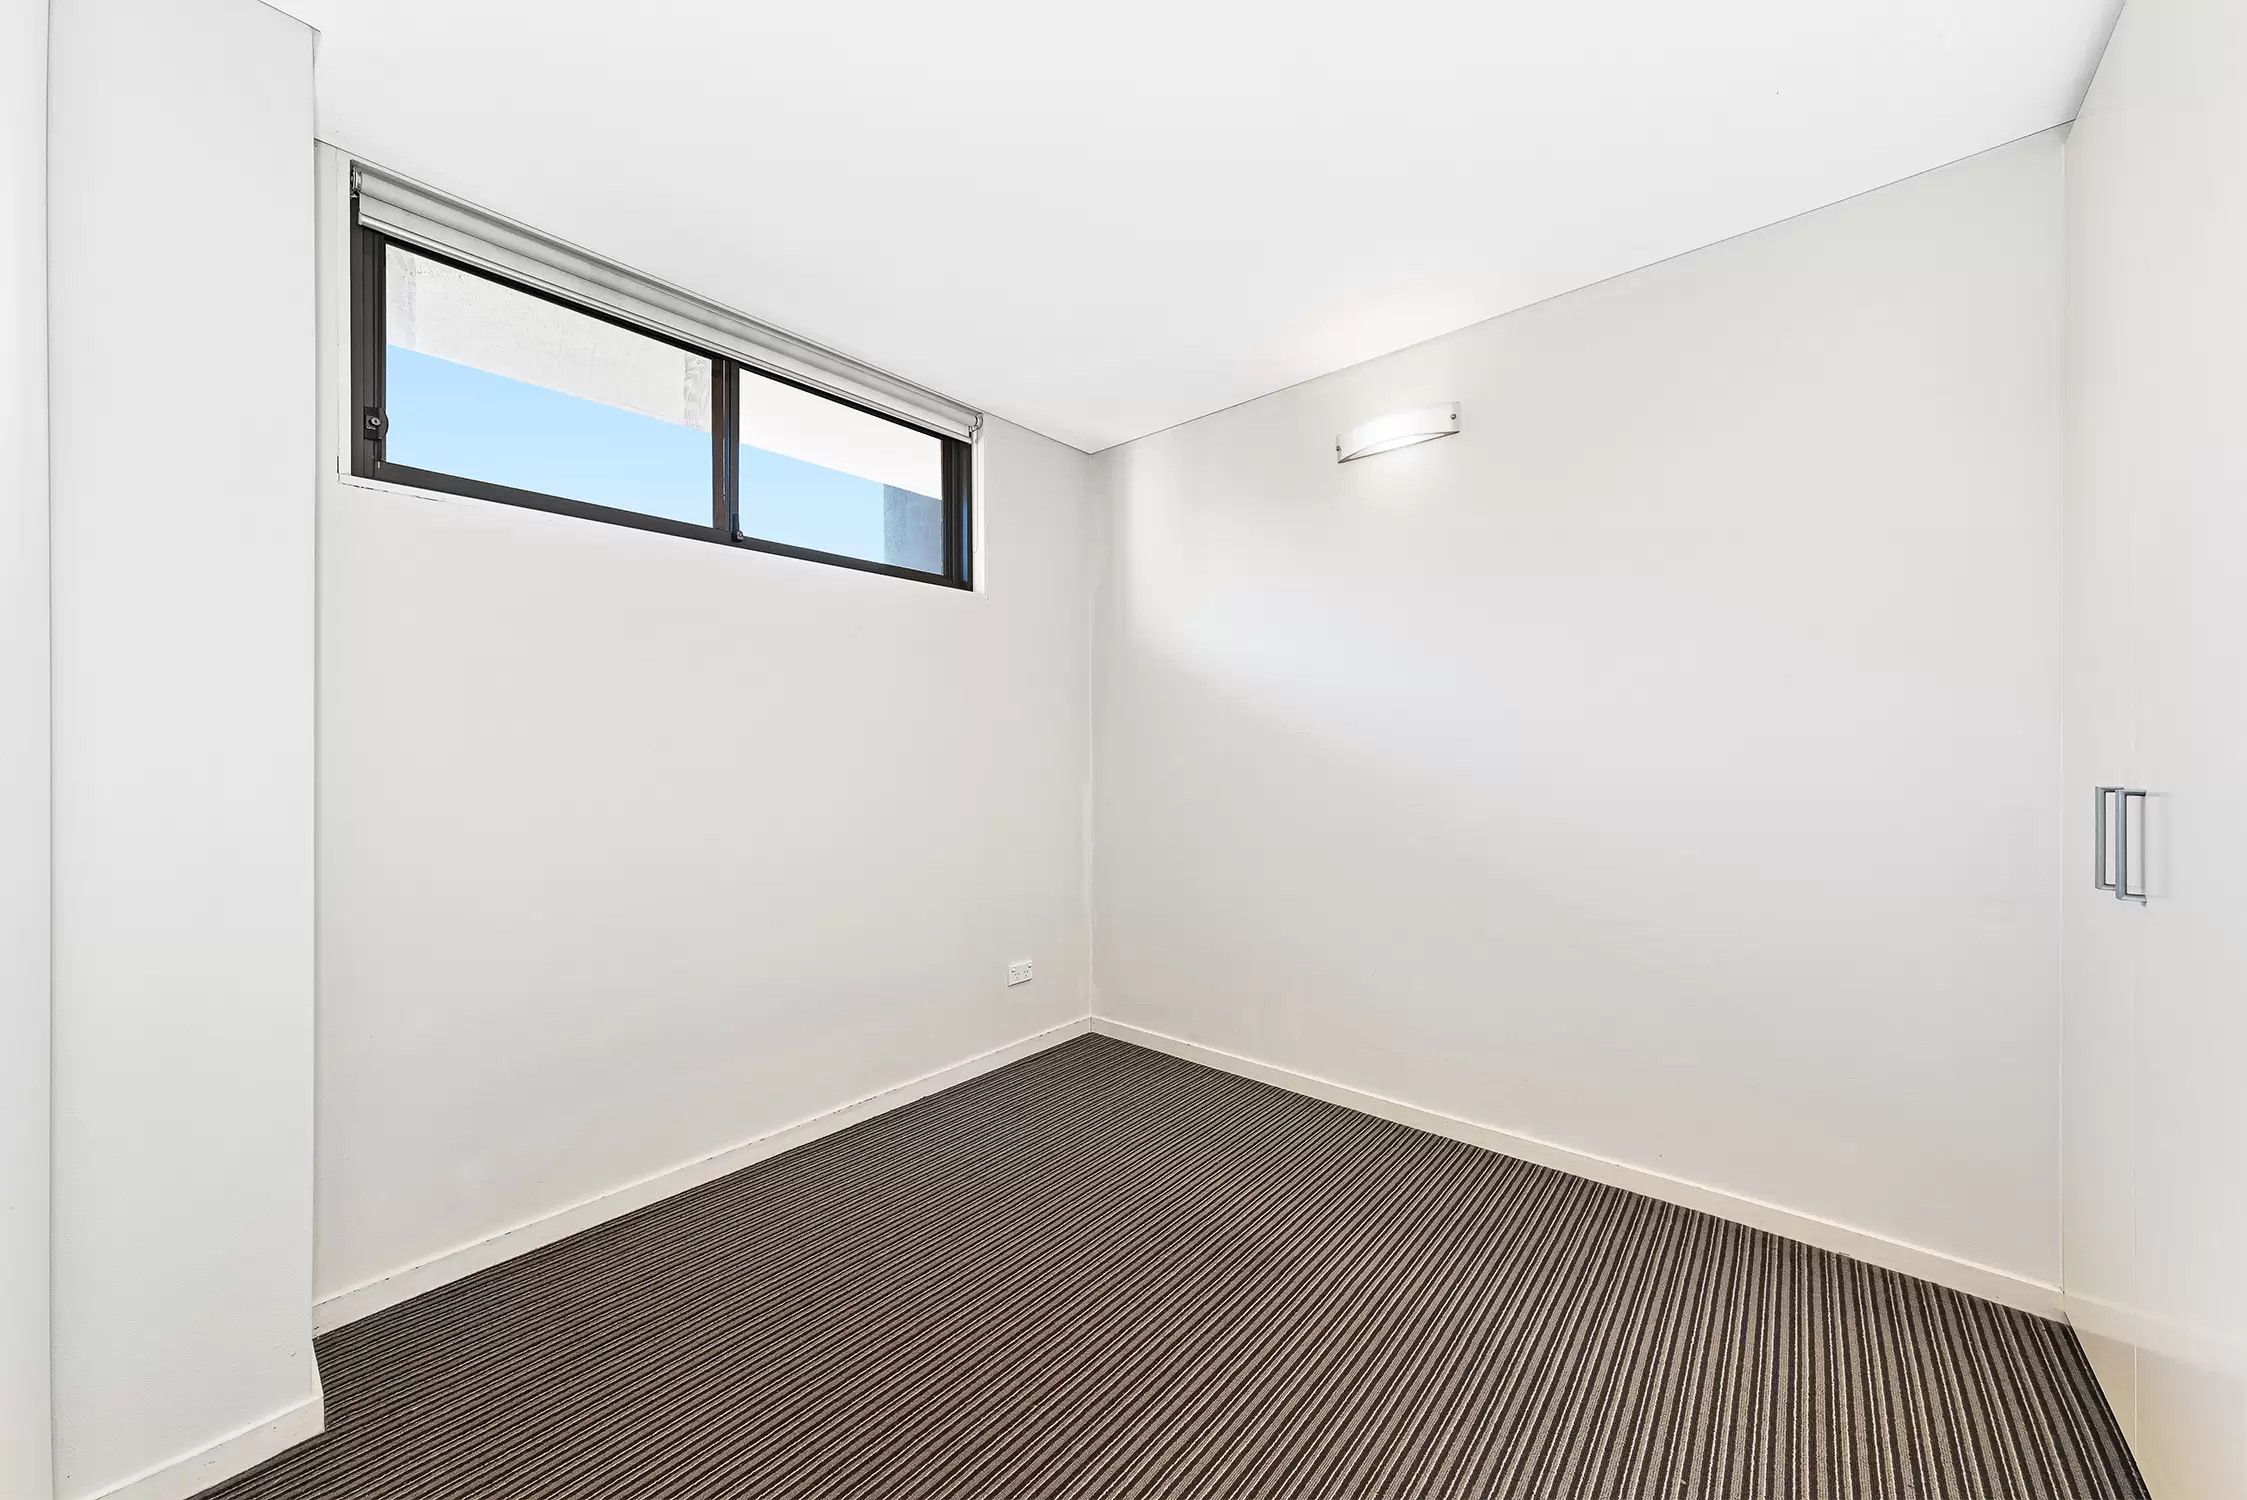 15/7-9 Alison Road, Kensington For Lease by Raine & Horne Randwick | Coogee - image 3